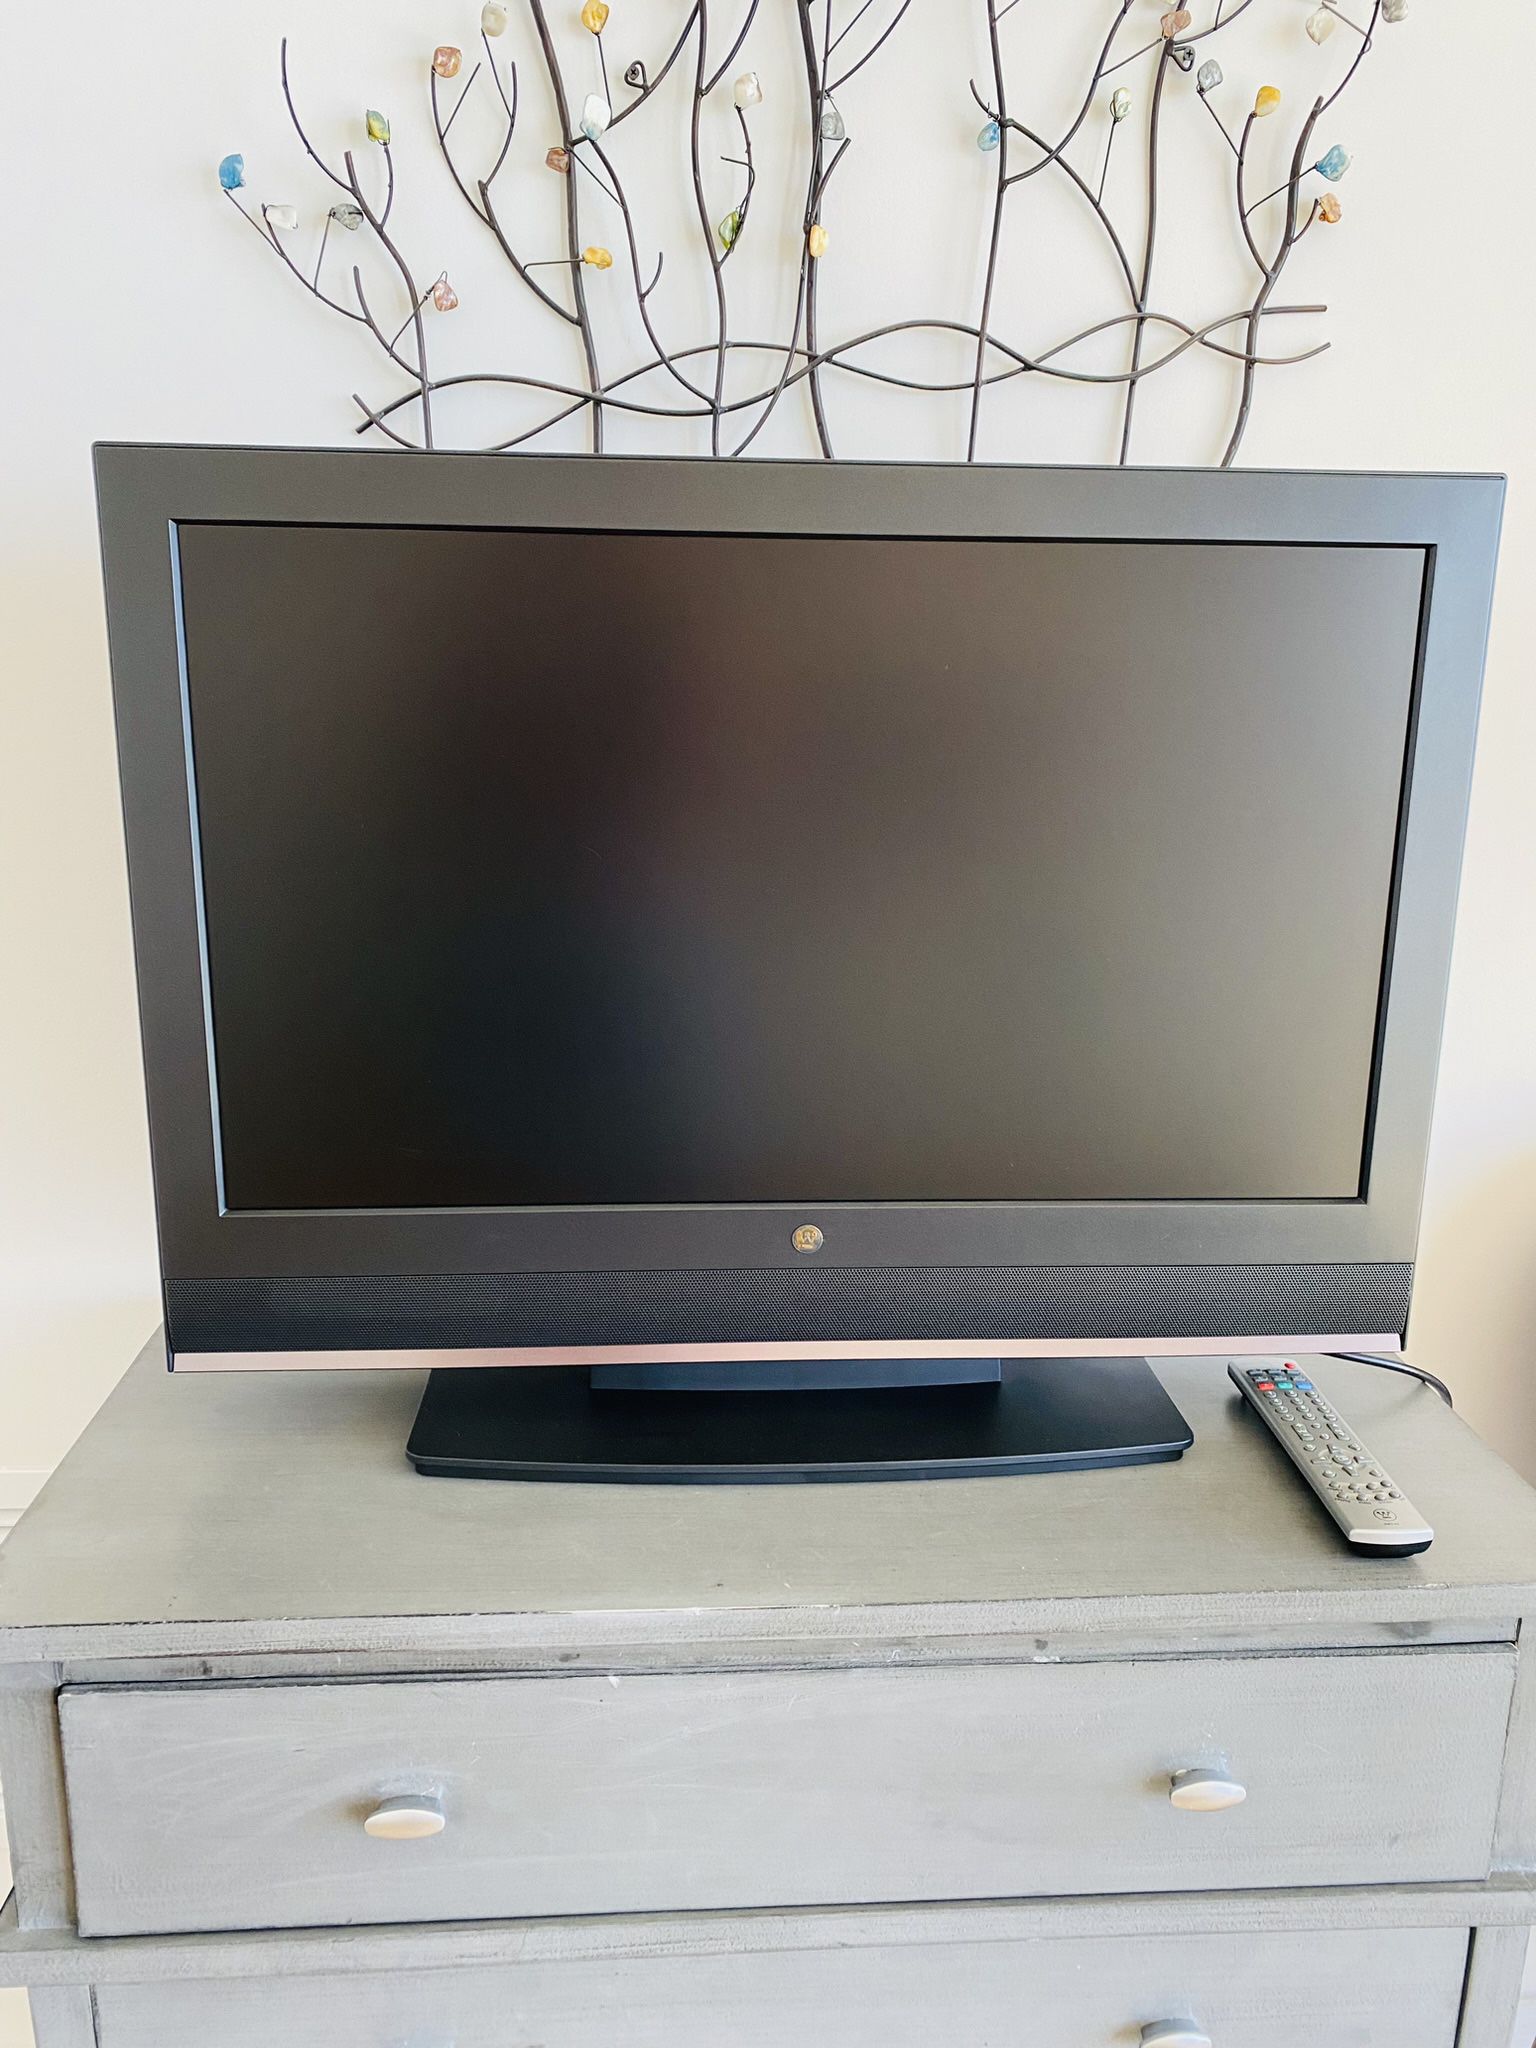 Excellent flat screen HDTV. Widescreenн 32”. Remote control. Can be used as computer monitor. Barely used. $79 or best offer. Great bargain. 